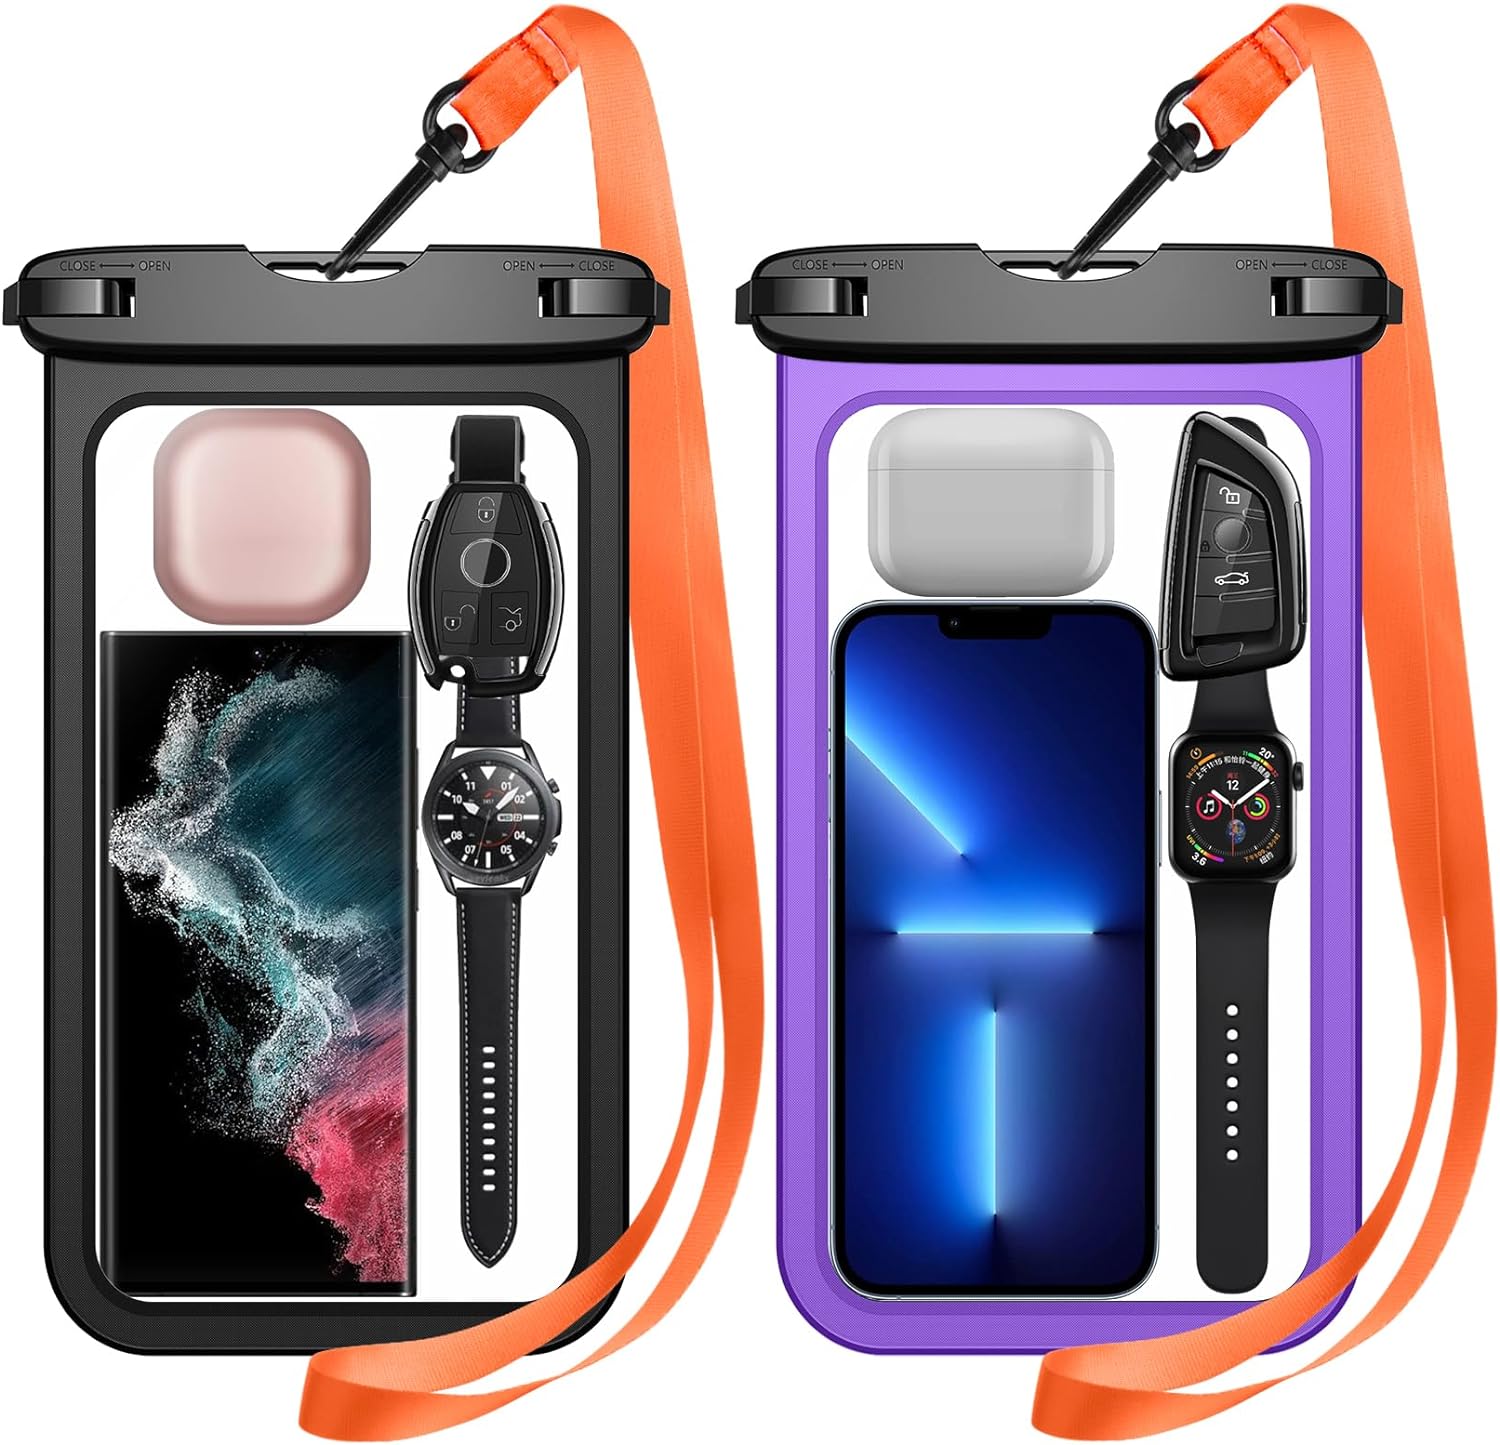 Temdan 2 Pcs Waterproof Phone Pouch, [Up to 10 Large] Universal IPX8 Waterproof Cell Phone Case Dry Bag with Lanyard for iPhone 15 Pro Max/14/13/12/11/SE,Galaxy S23 Ultra/S22/S21 for Vacation -Purple